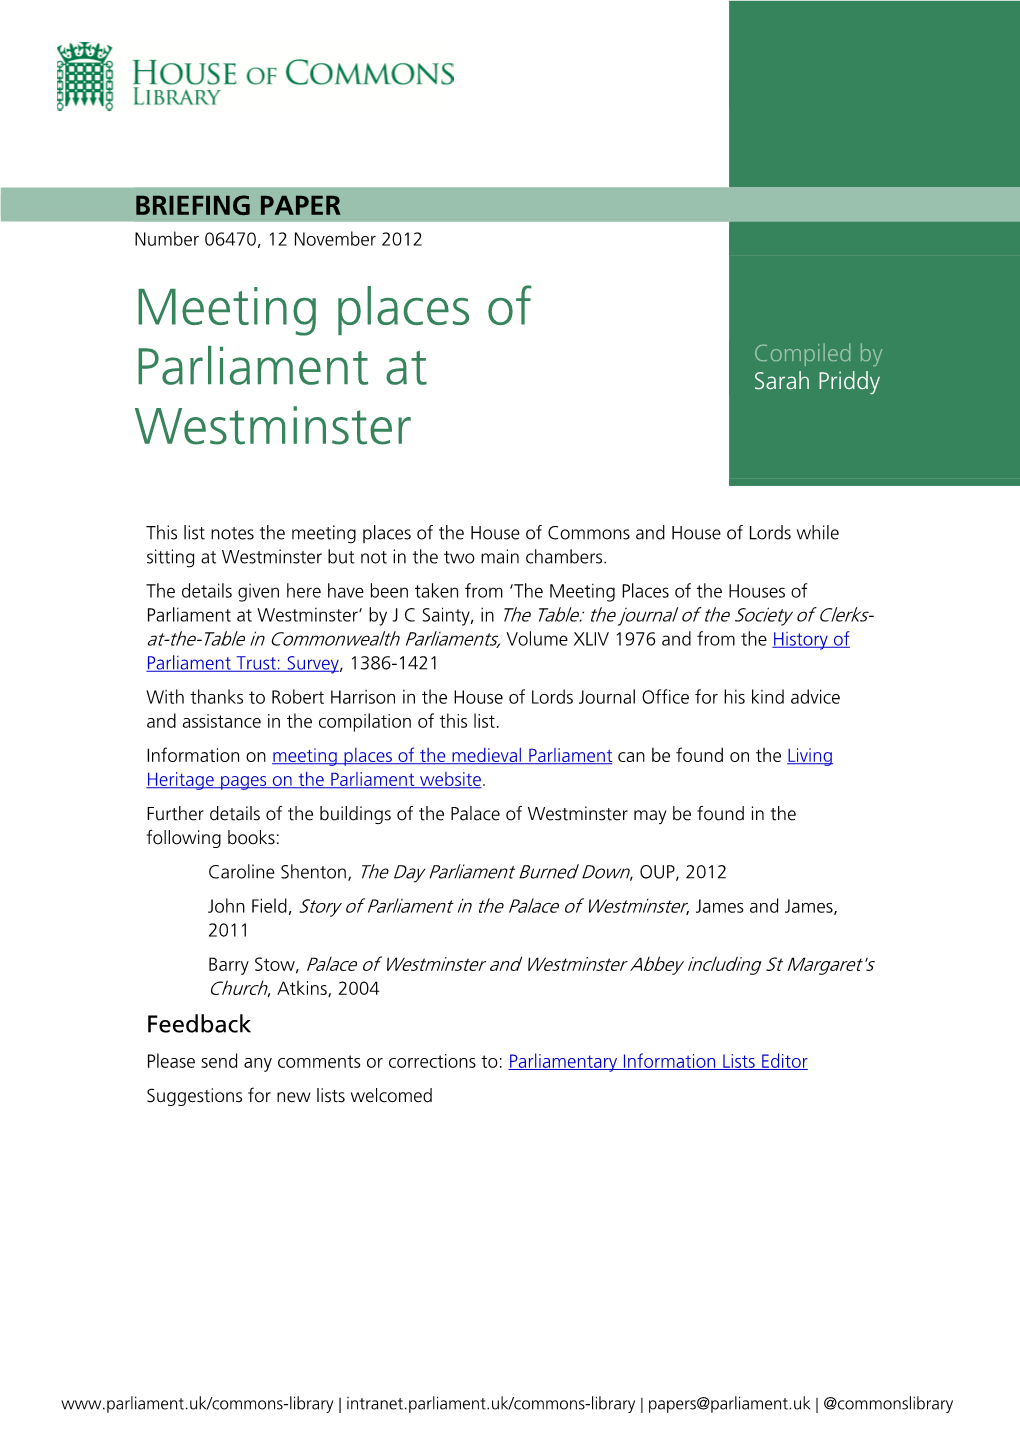 Meeting Places of Parliament at Westminster